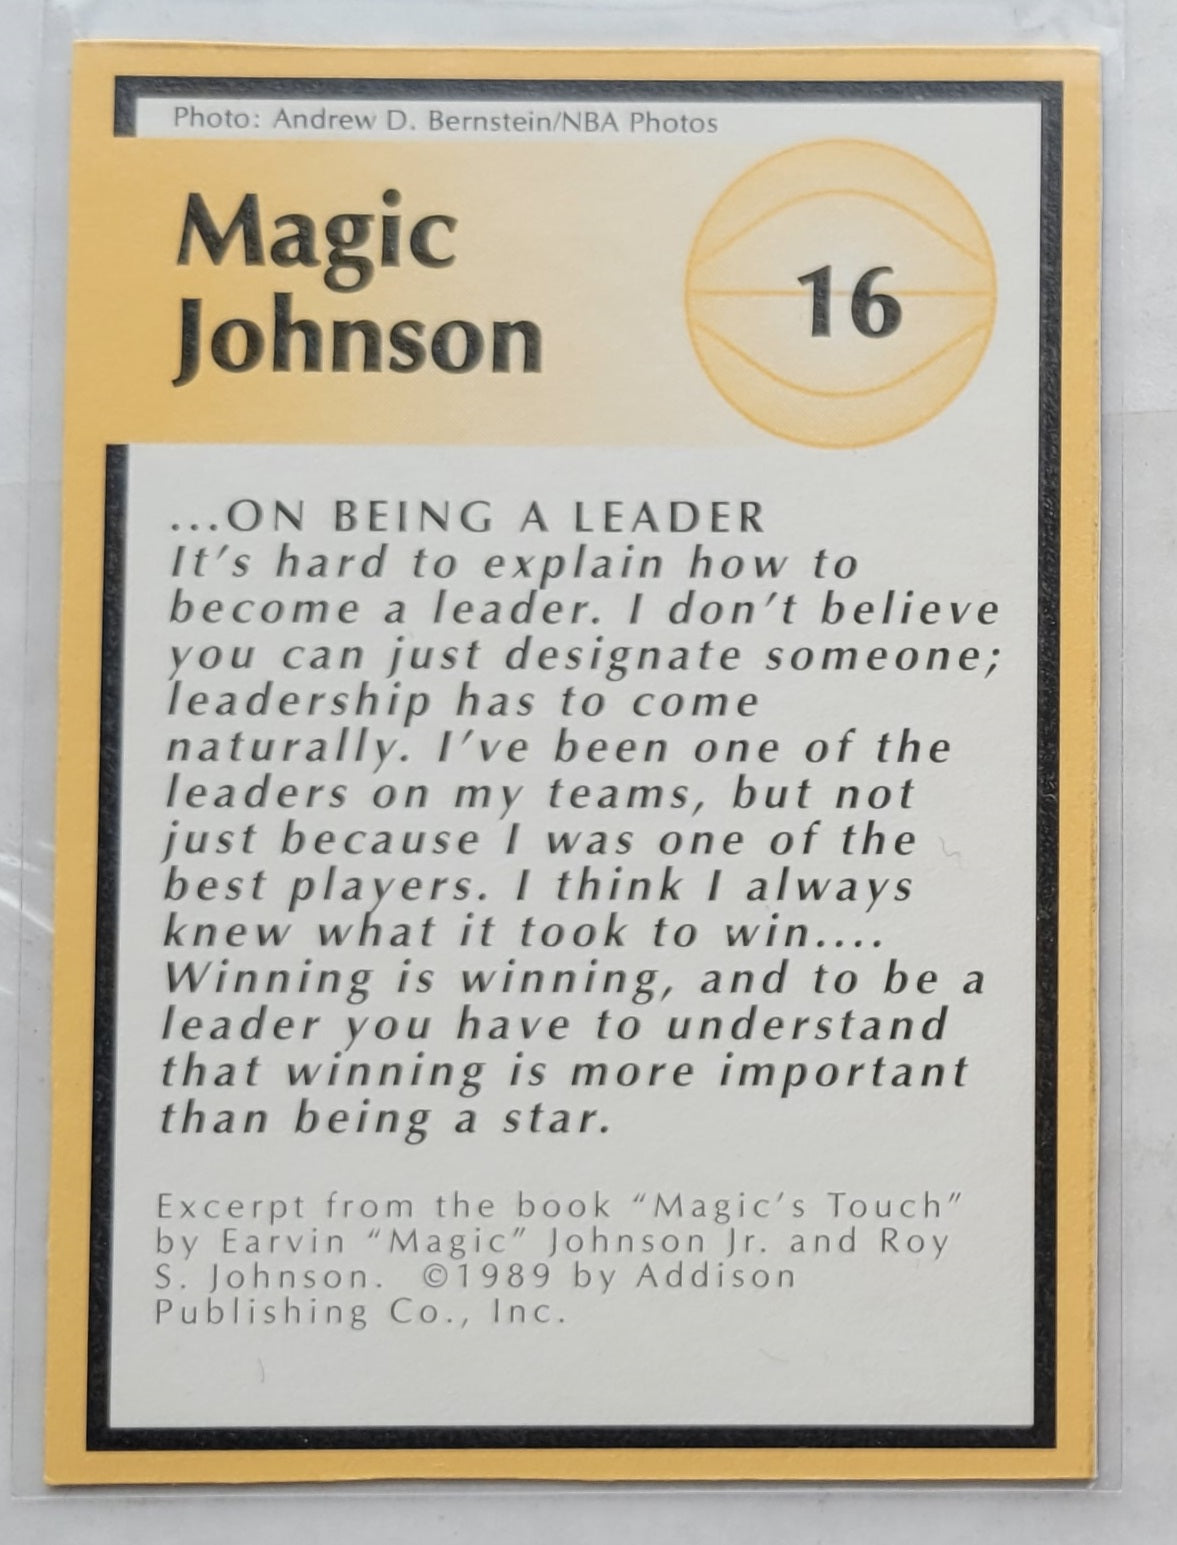 Magic Johnson - 1989 Excertp from the book 'Magic's Touch' #16